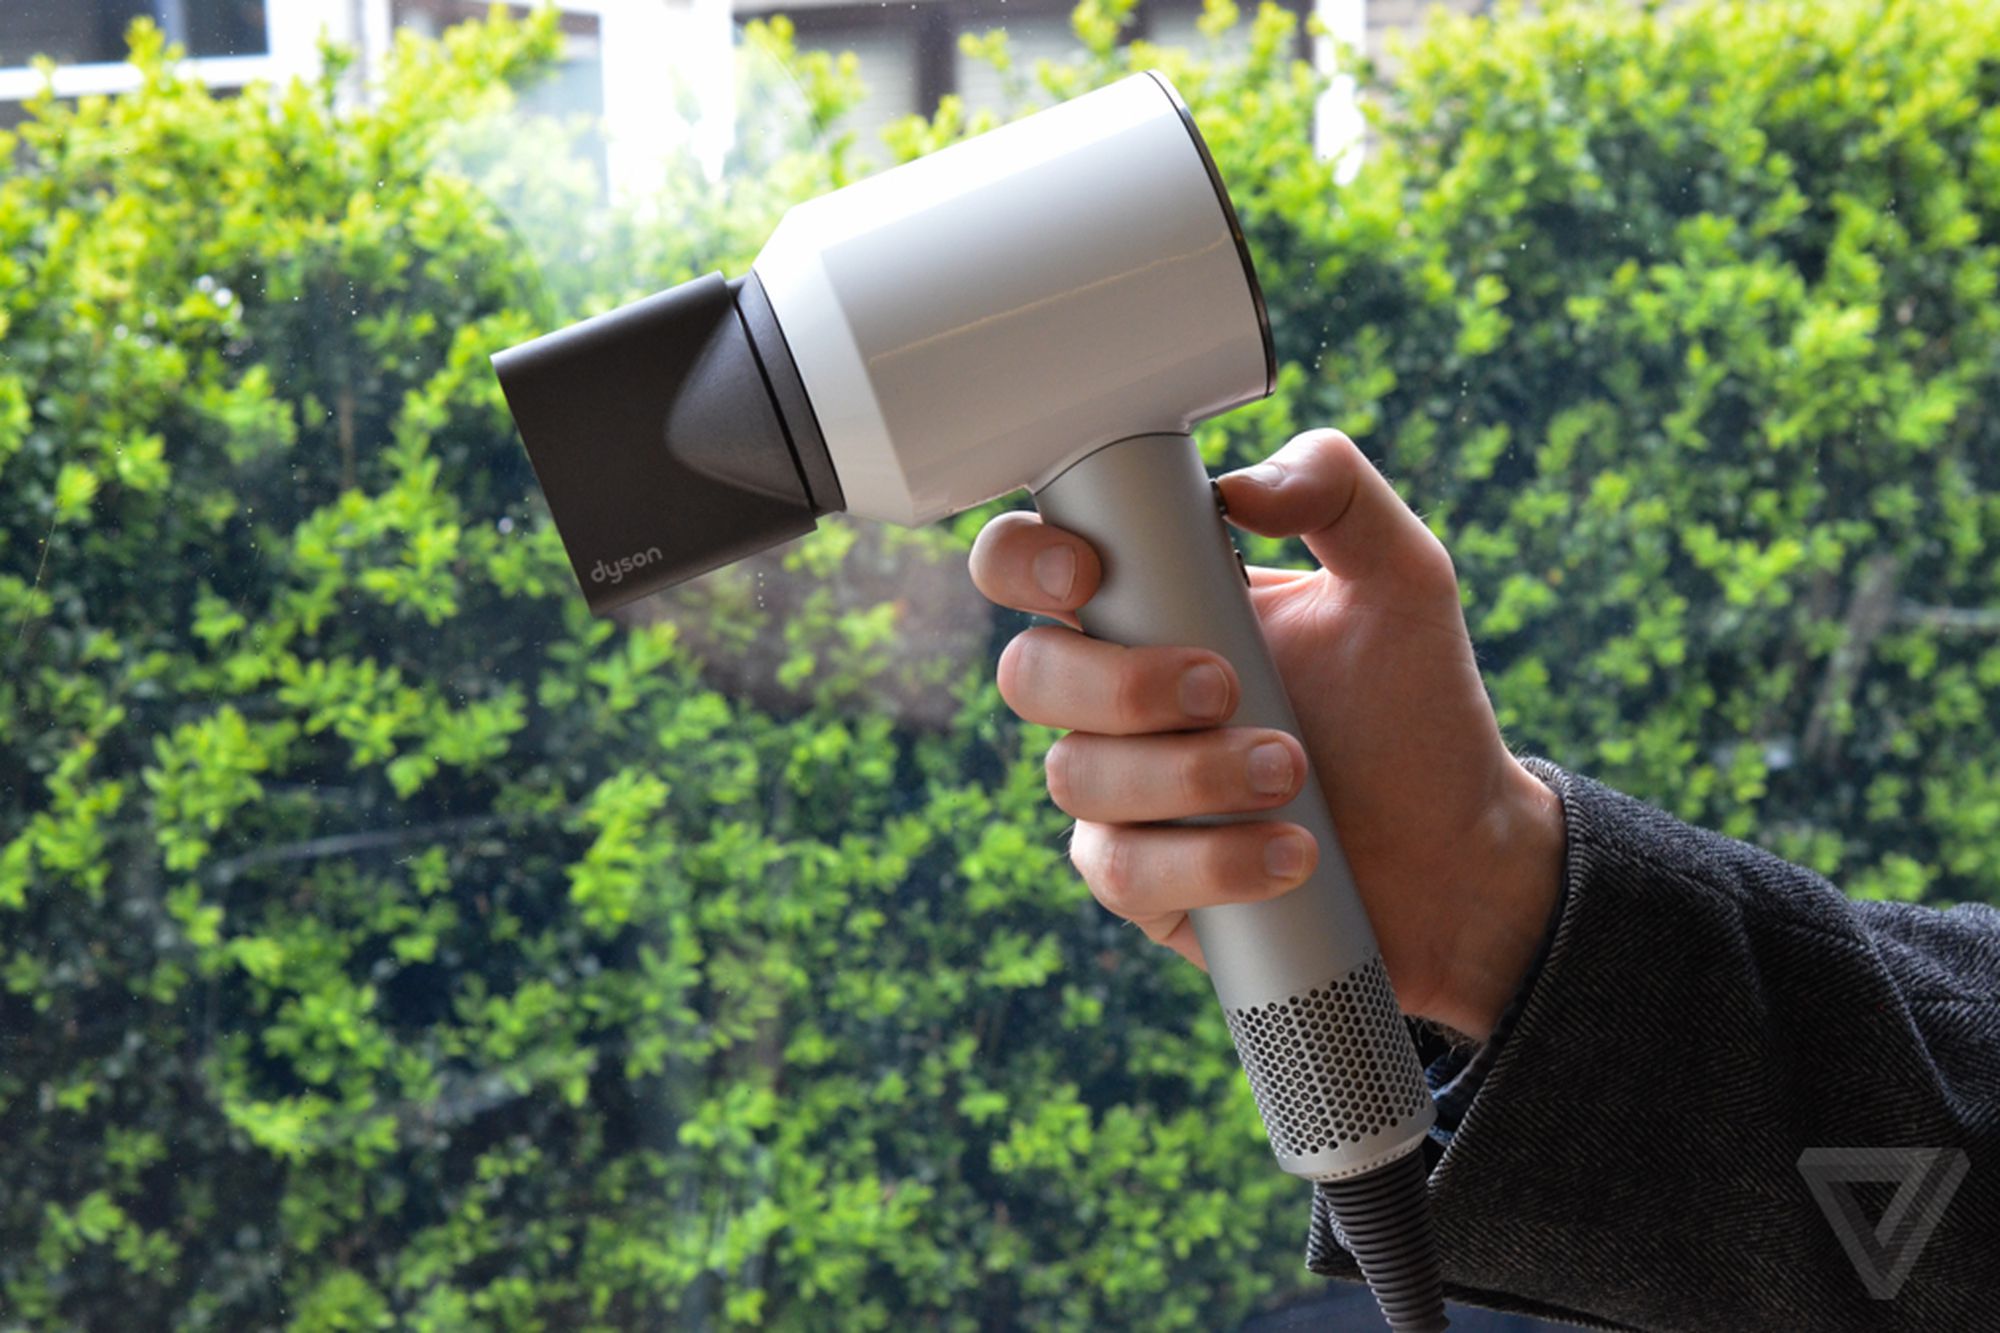 Dyson's first ever hair dryer is the chic, industrial Supersonic - The Verge